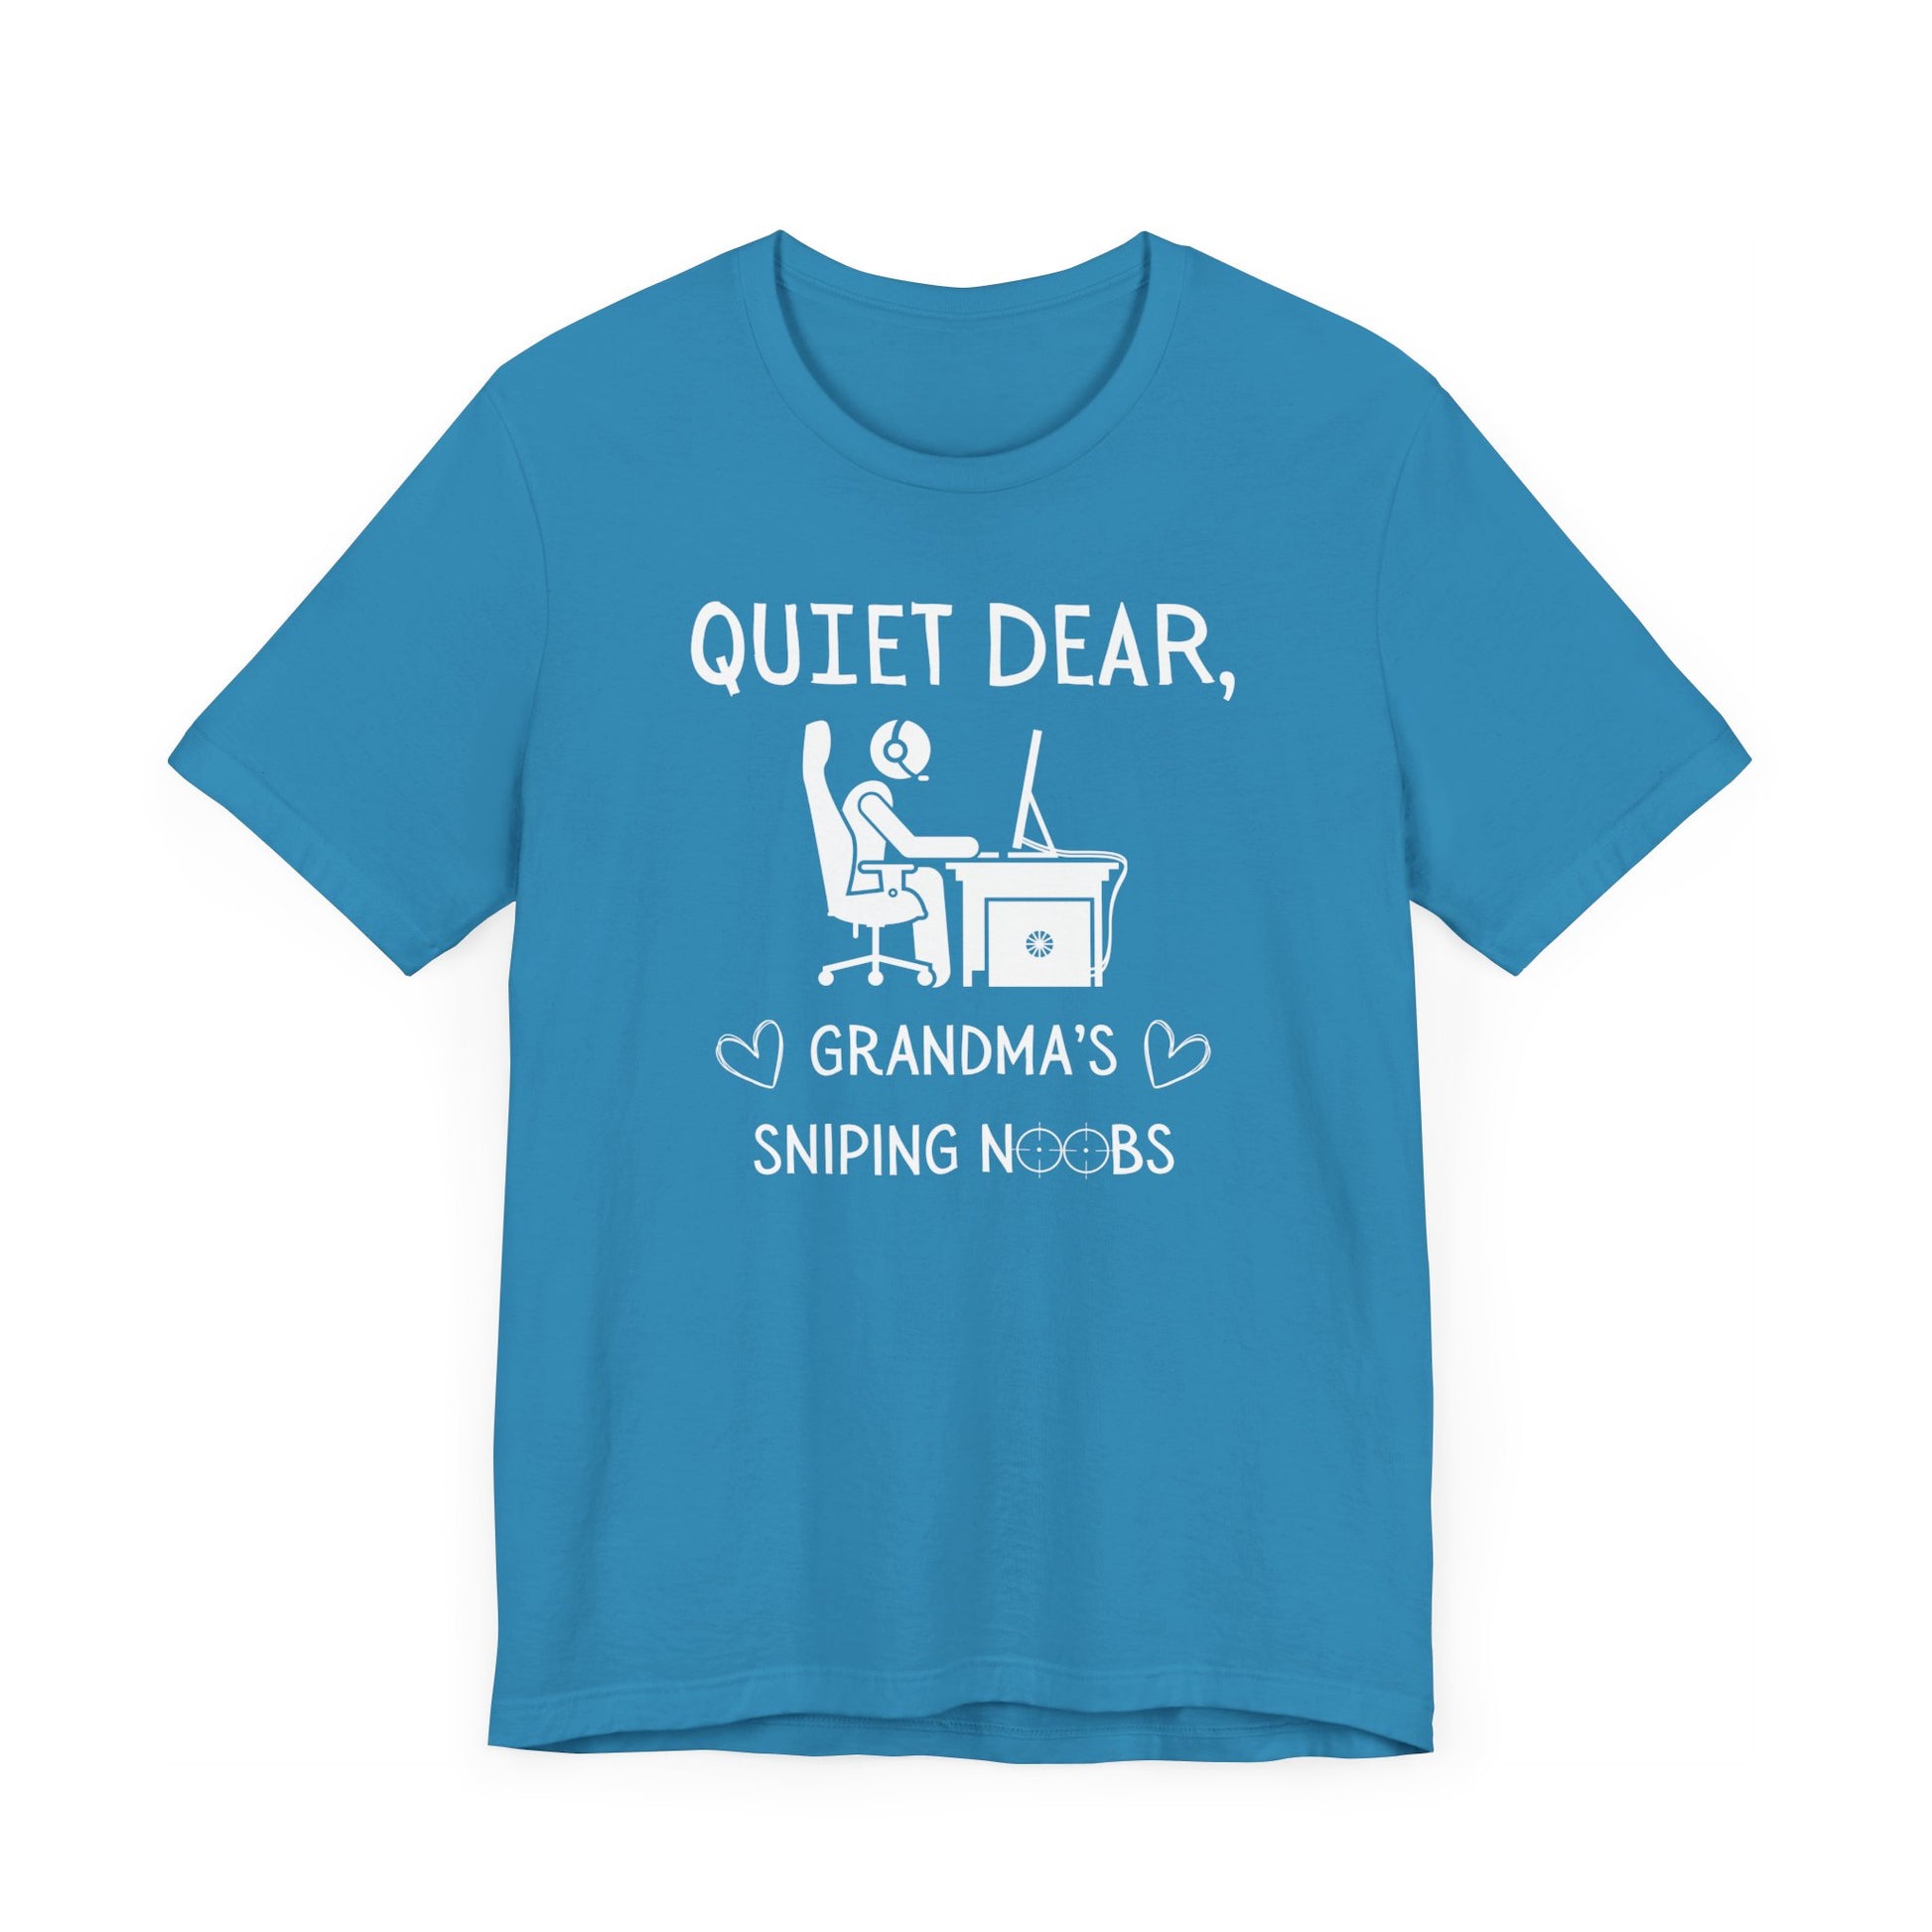 A flat image of an aqua t-shirt that reads Quiet Dear, Grandma's Sniping Noobs in white text. The lower text is framed by two hearts, and the O's are in the shape of sniper scopes. In the center of the shirt is an image of a person at a desk with a gaming PC.